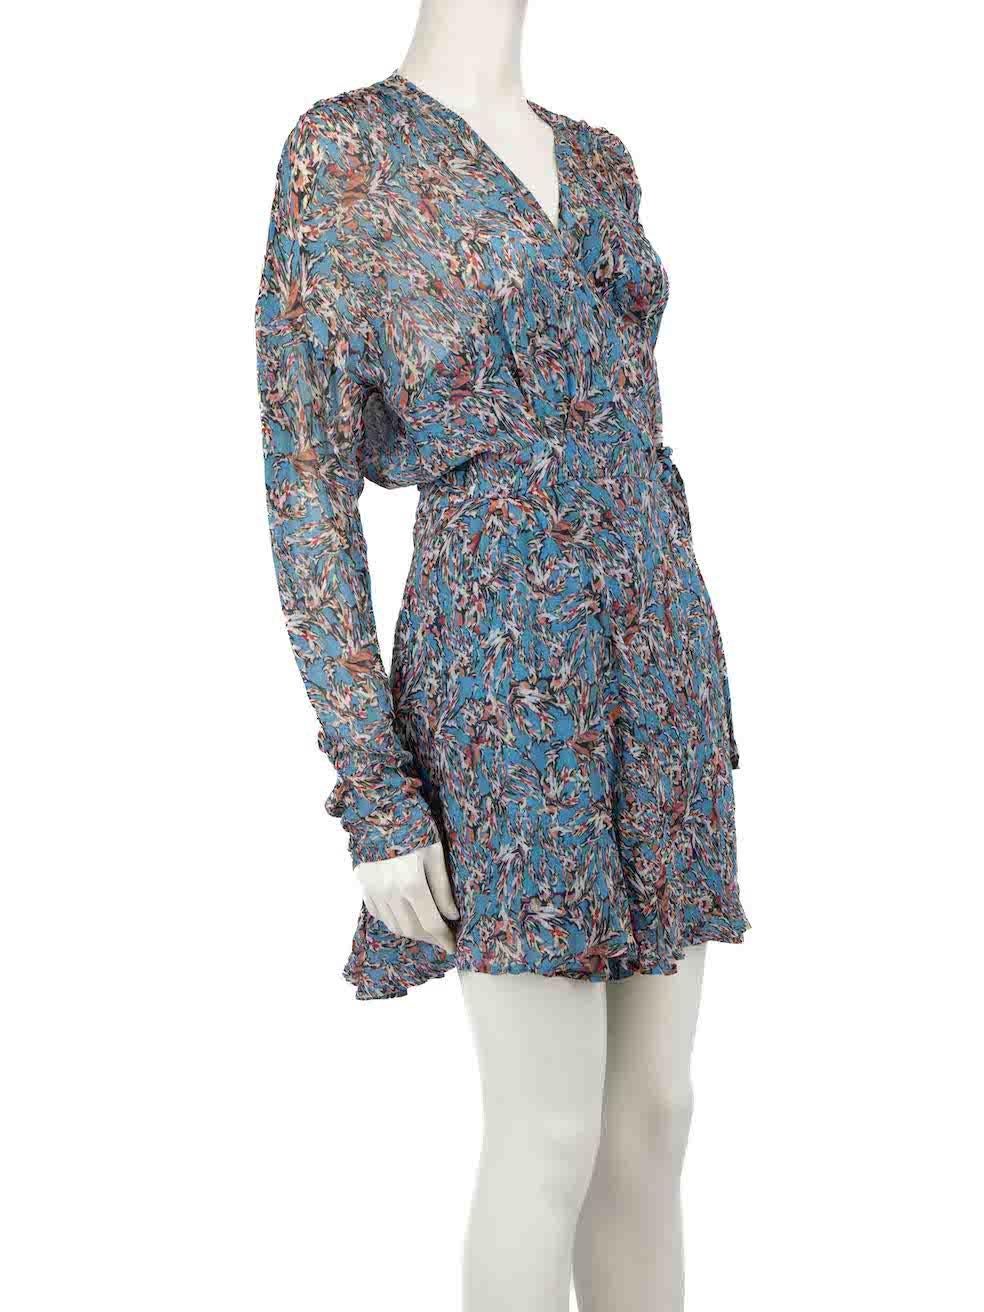 CONDITION is Very good. Minimal wear to dress is evident. Minimal wear to rear skirt where pull thread to weave is evident on this used Iro designer resale item.
 
 
 
 Details
 
 
 Blue
 
 Viscose
 
 Wrap dress
 
 Abstract pattern
 
 Mini
 
